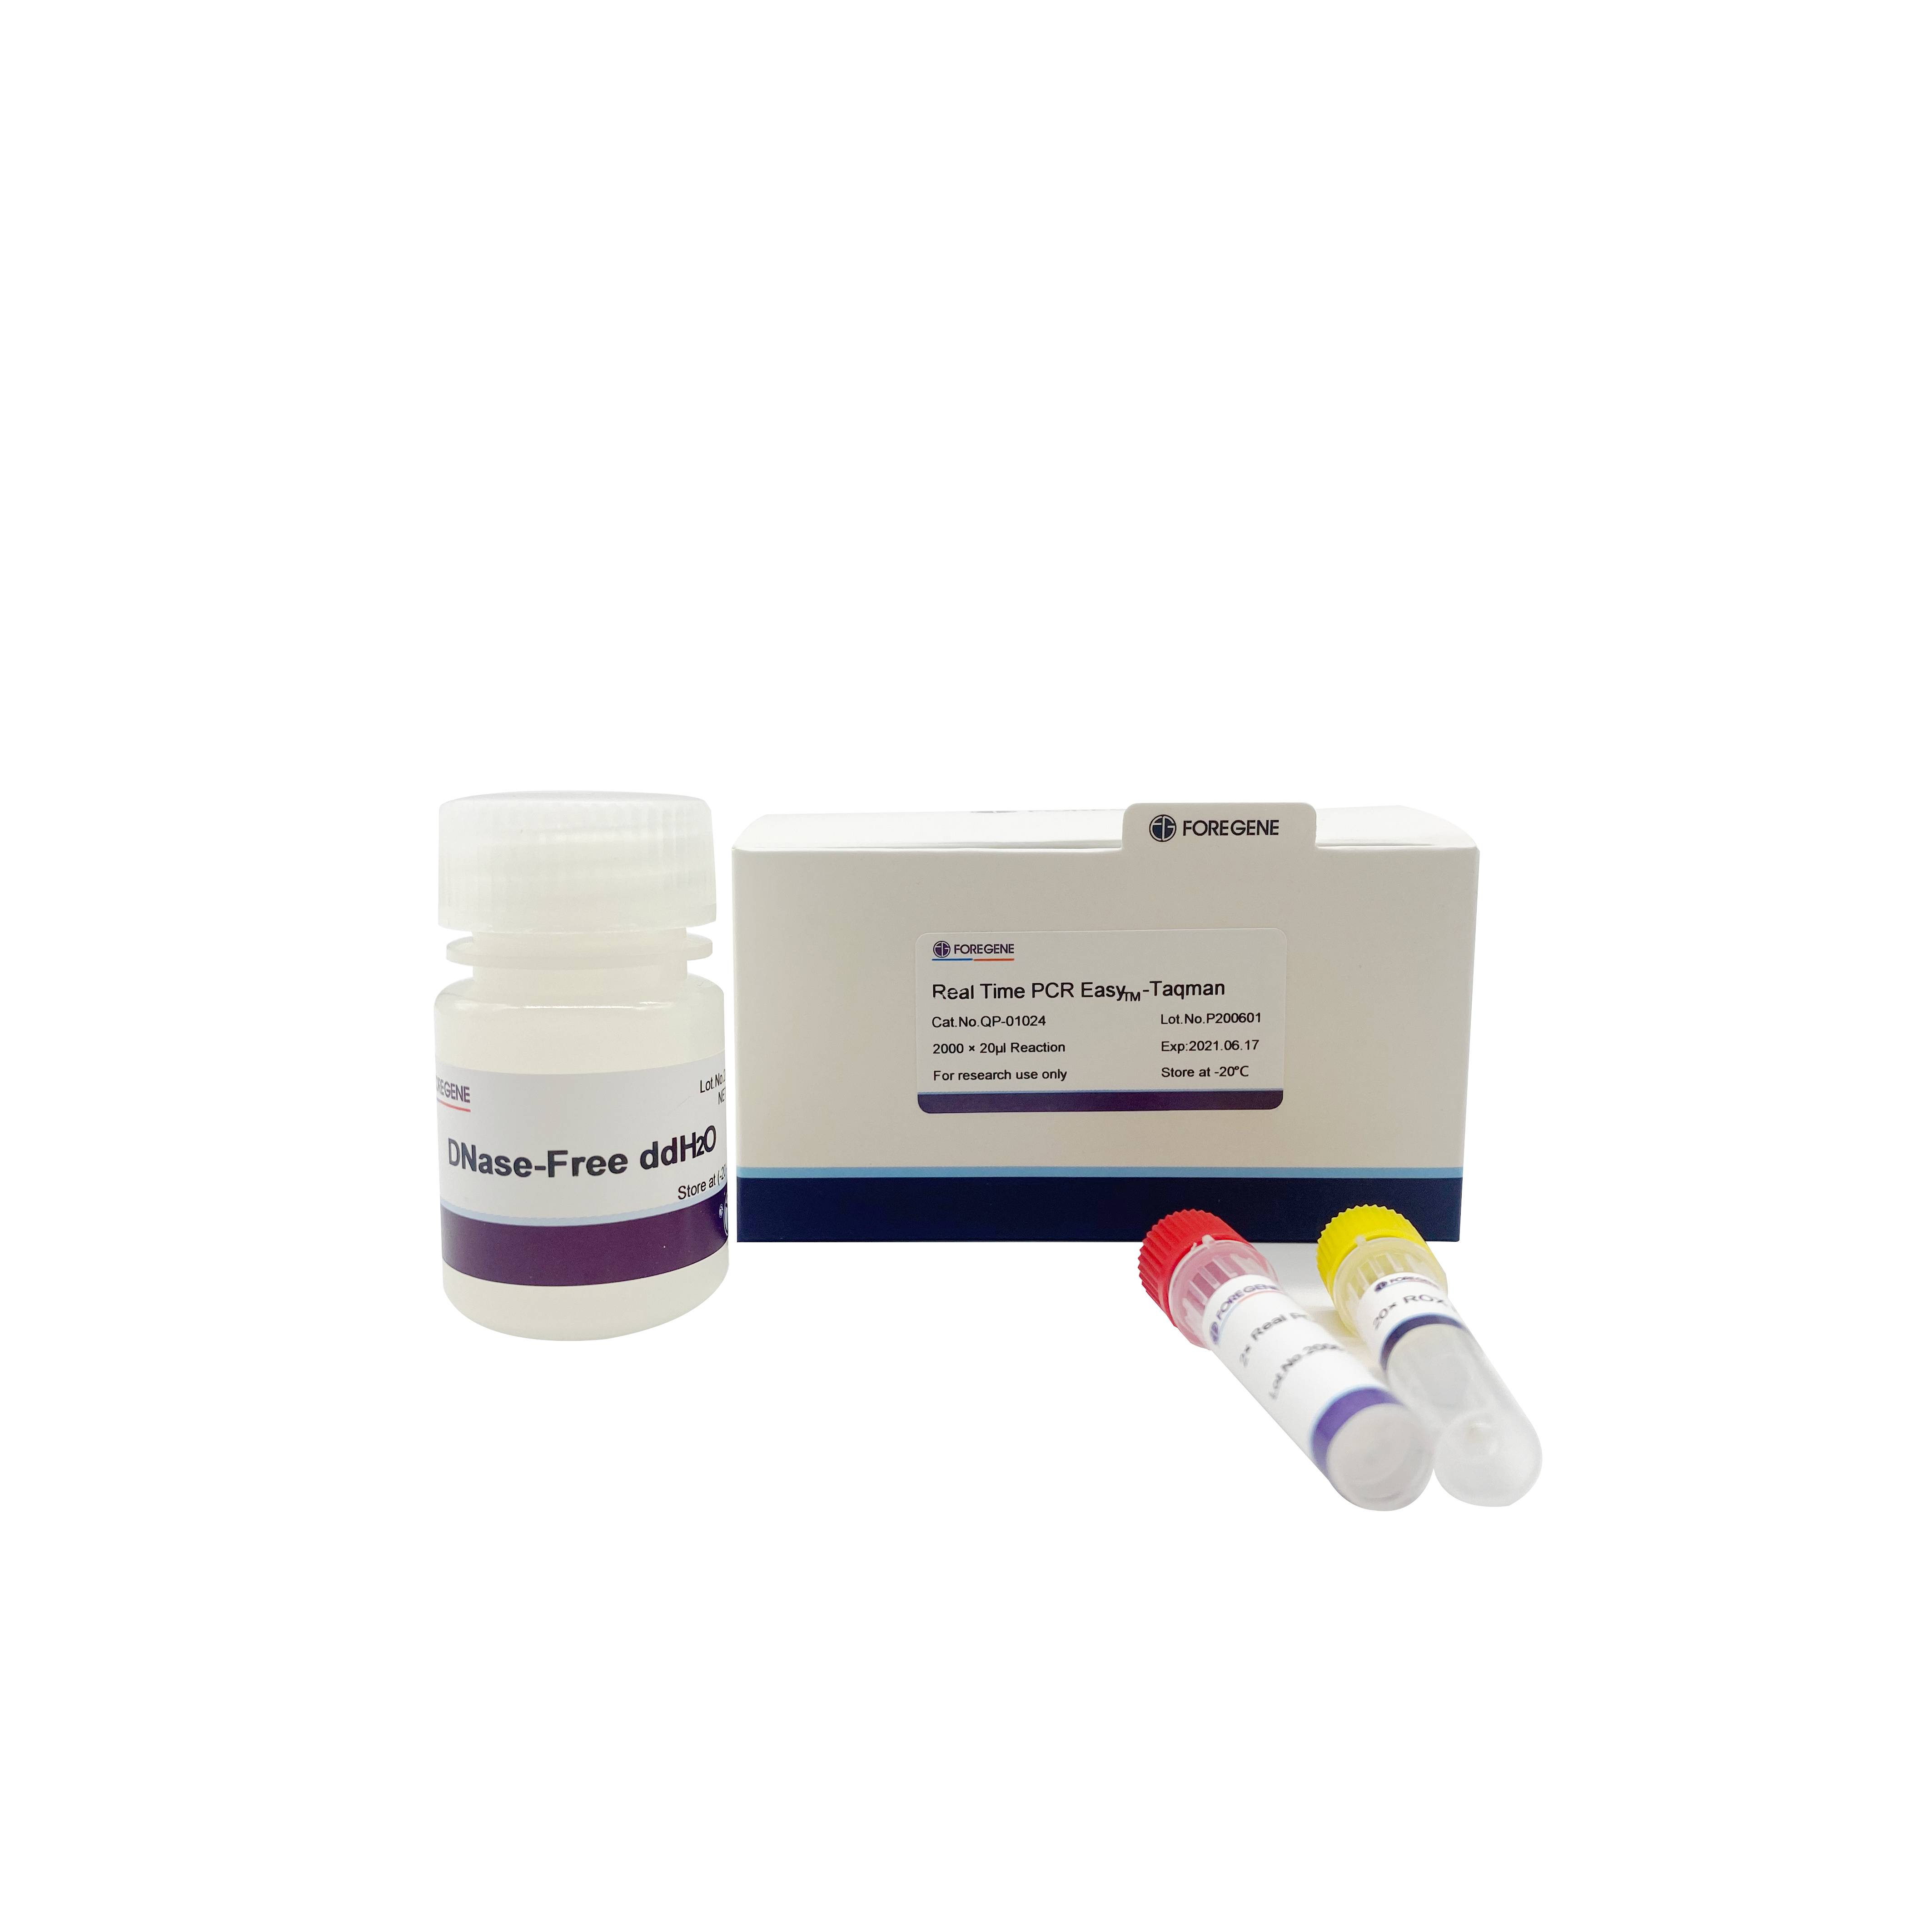 Best Price for Pcr Kit Cost - Real Time PCR Easyᵀᴹ-Taqman – Foregene